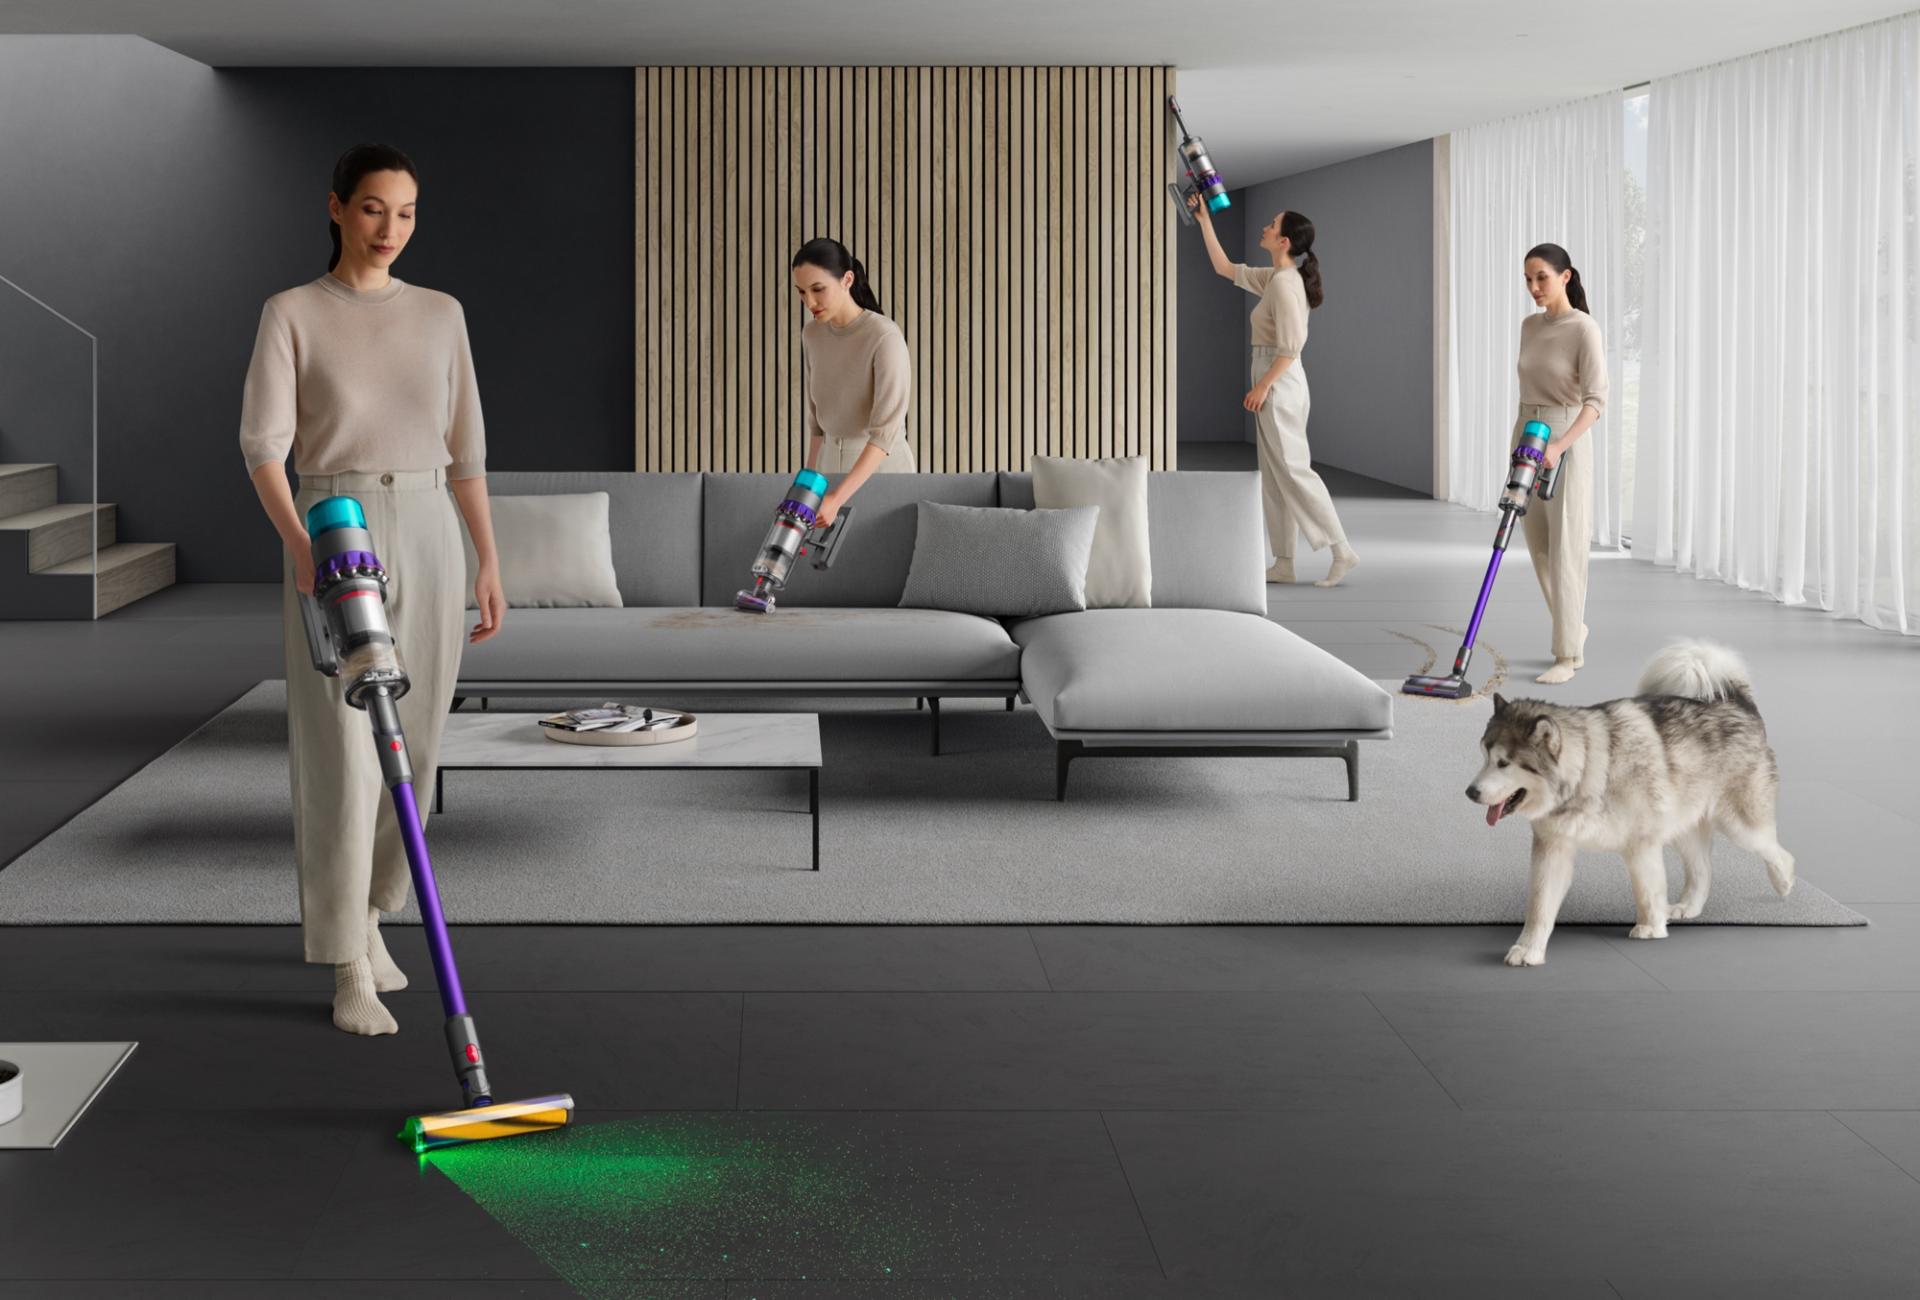  Dyson launches its most powerful HEPA cordless vacuum – capturing microscopic particles as small as 0.1 microns